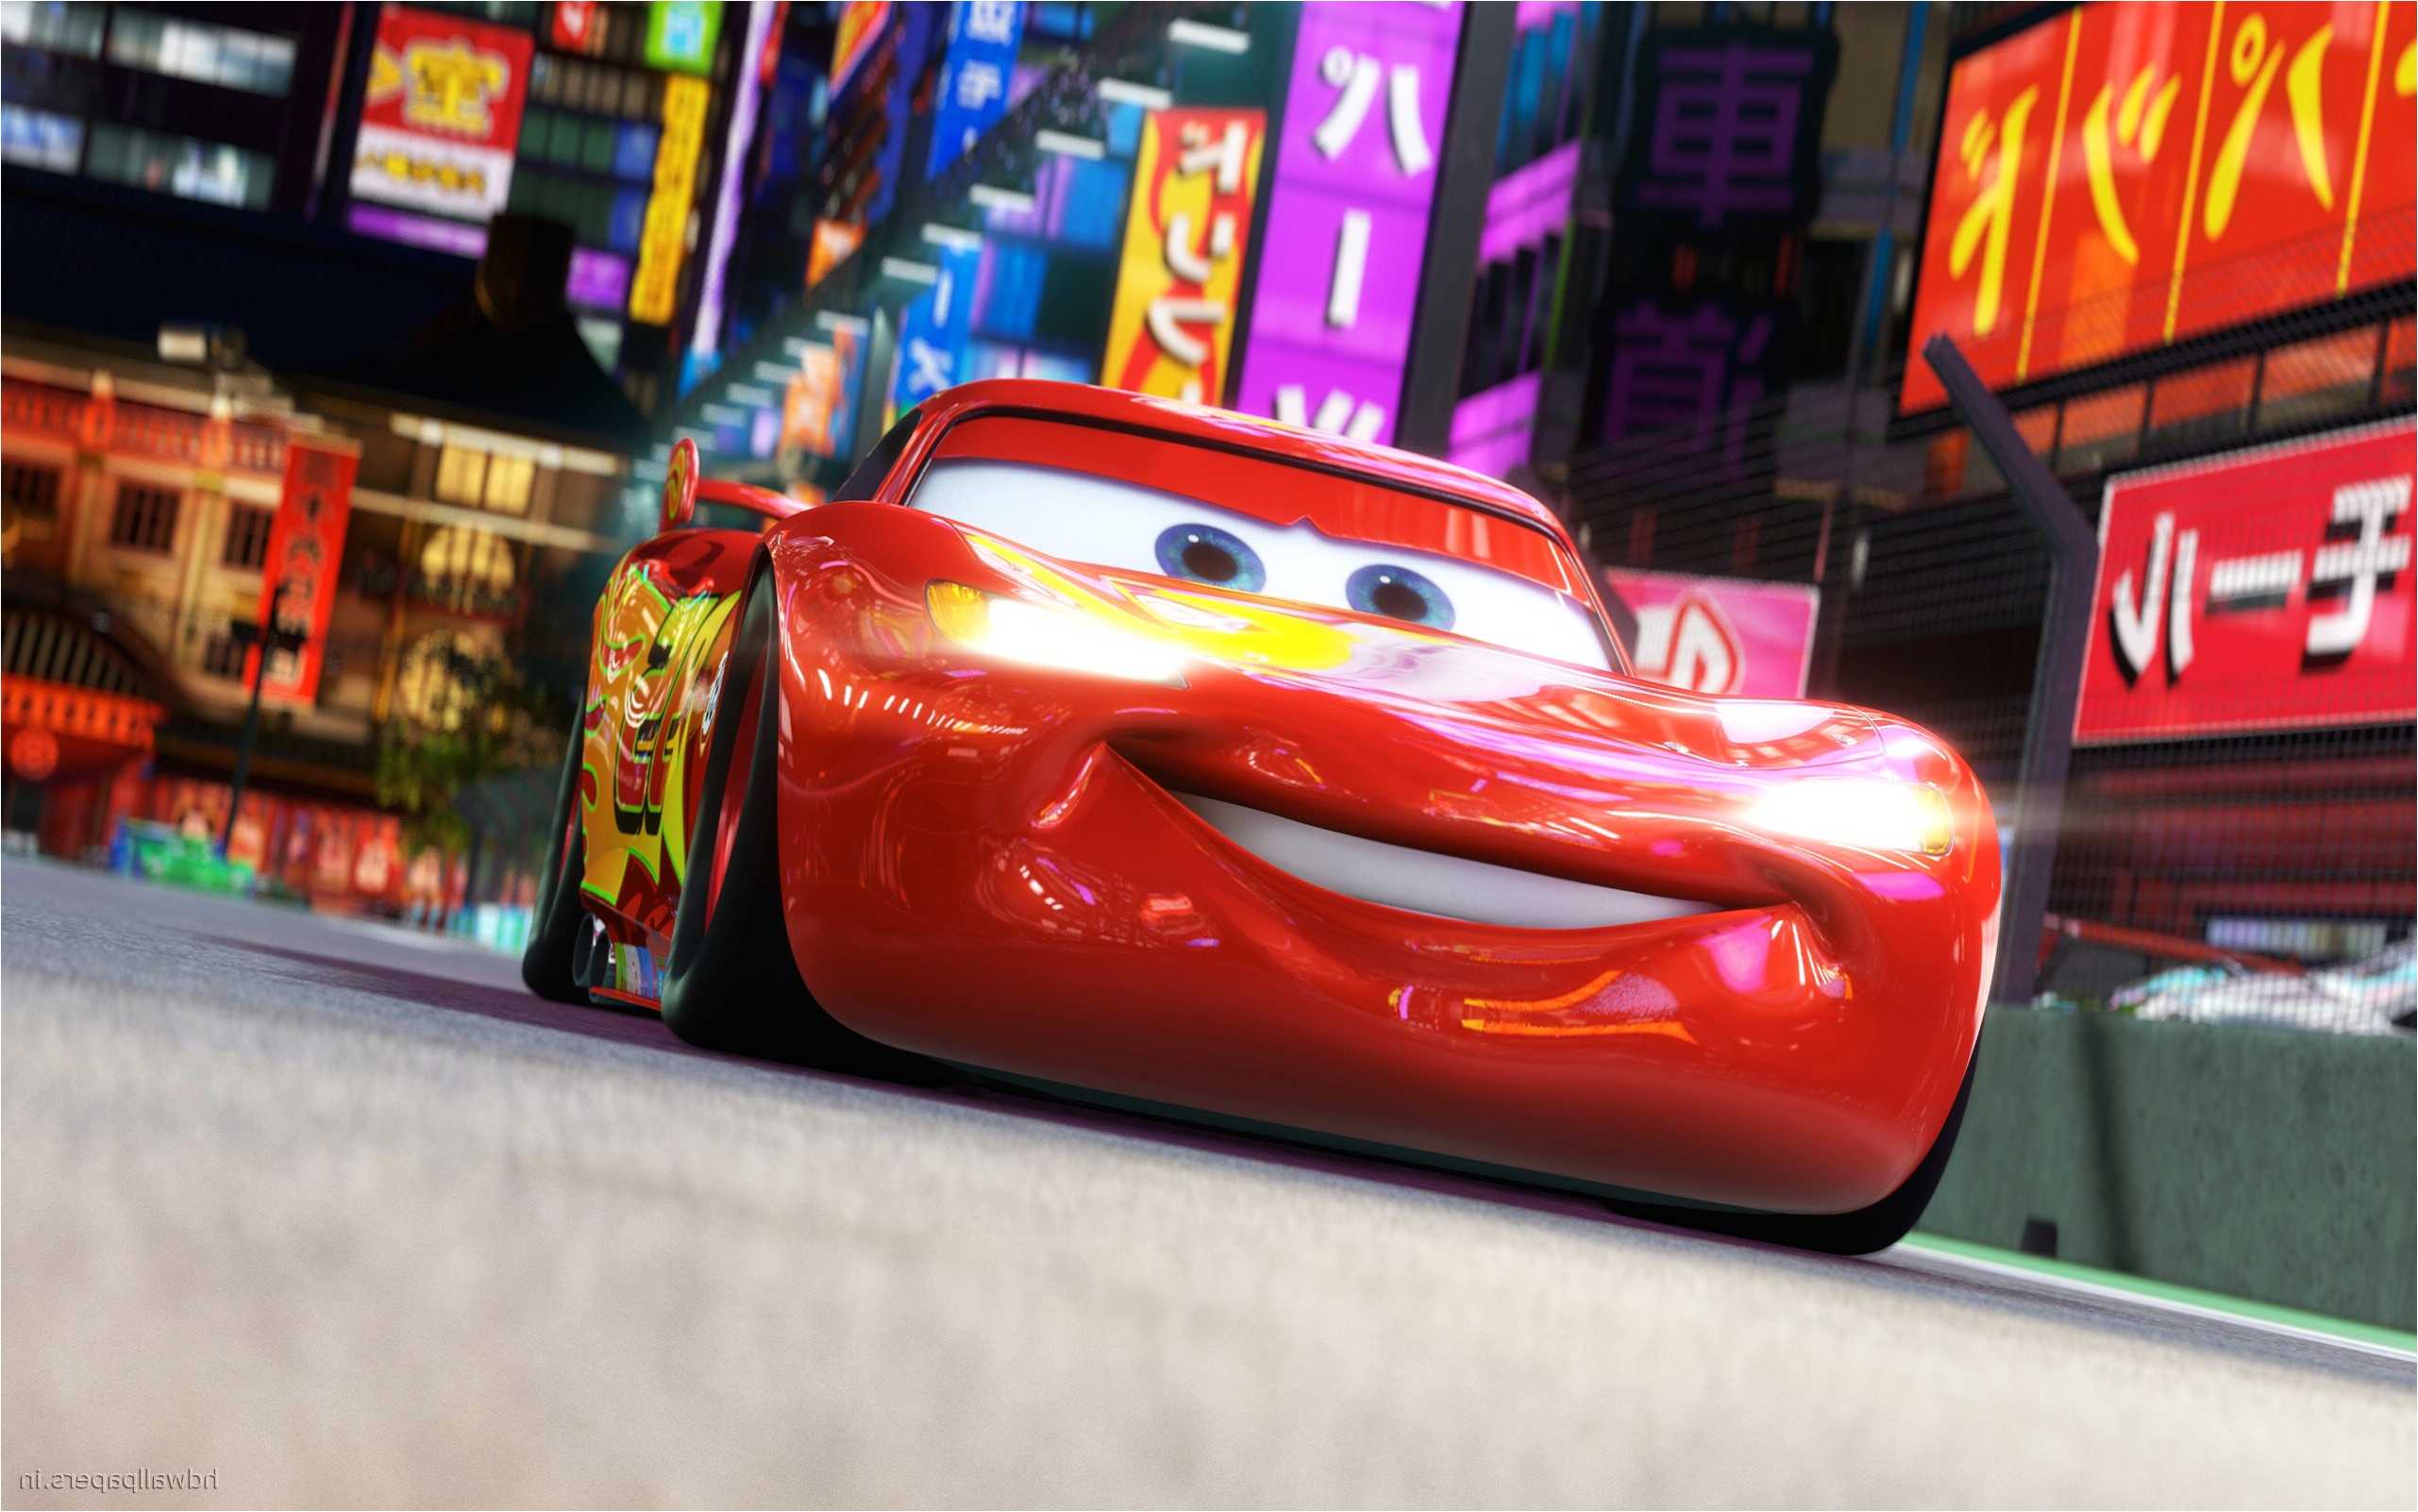 WD619: Cars 2 Wallpaper, Cars 2 Image in Best Resolutions, Full HD